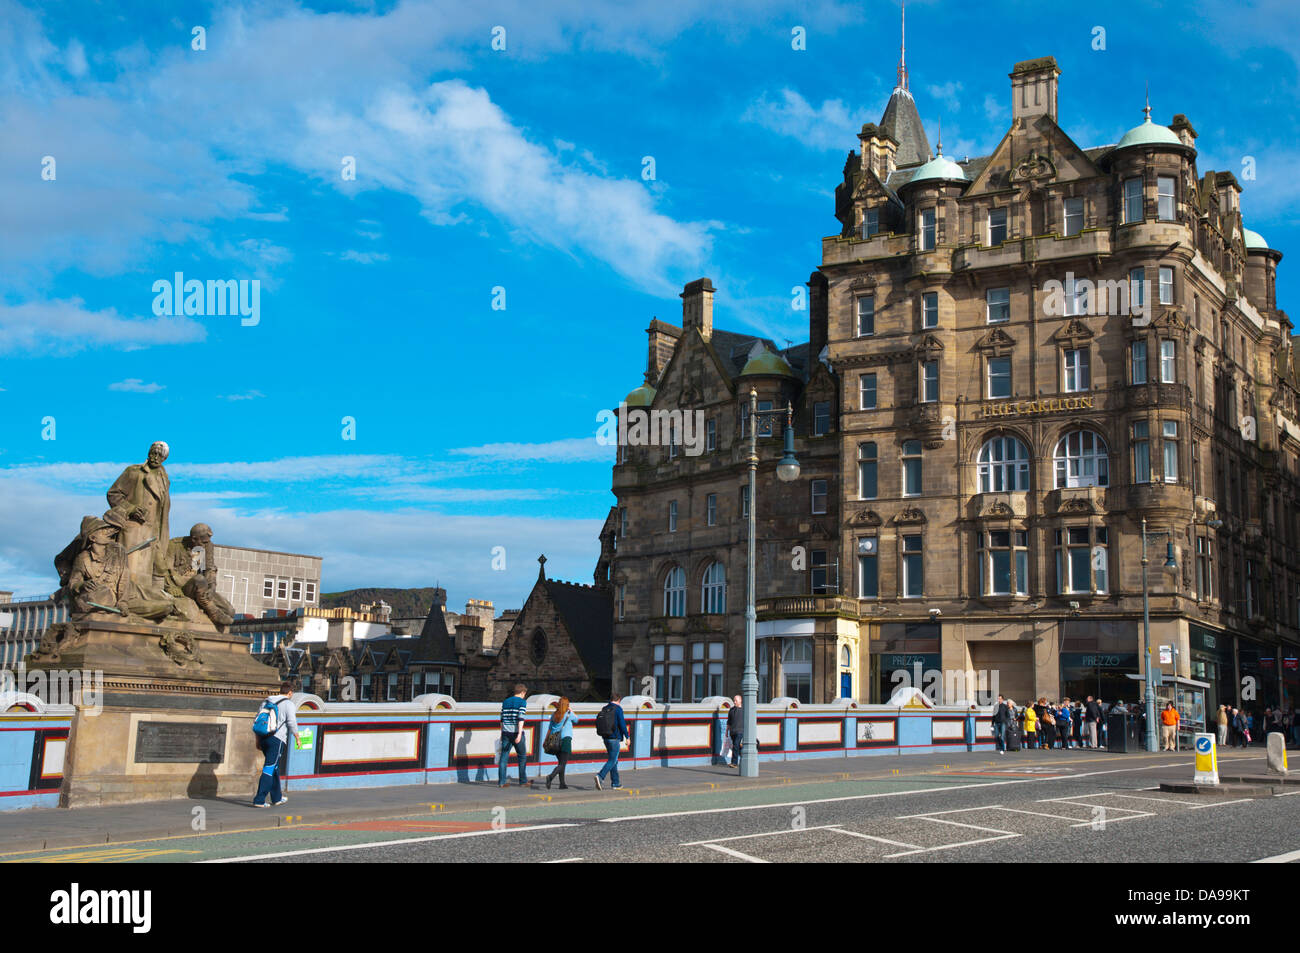 North Bridge between old and new towns central Edinburgh Scotland Europe Stock Photo